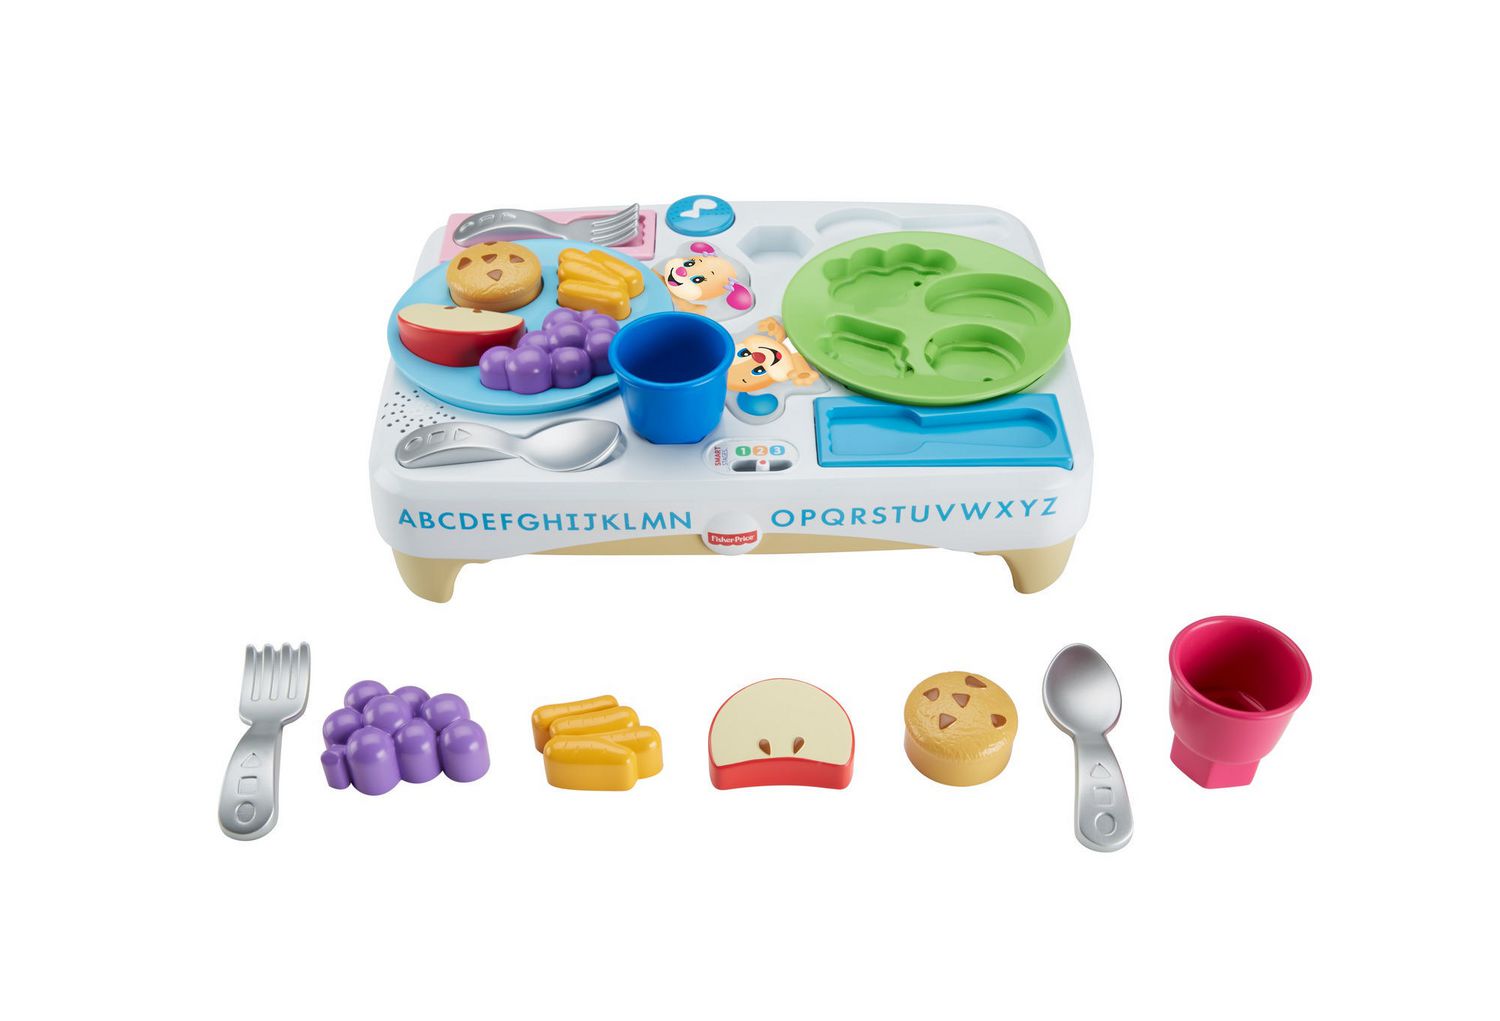 fisher price laugh and learn say please